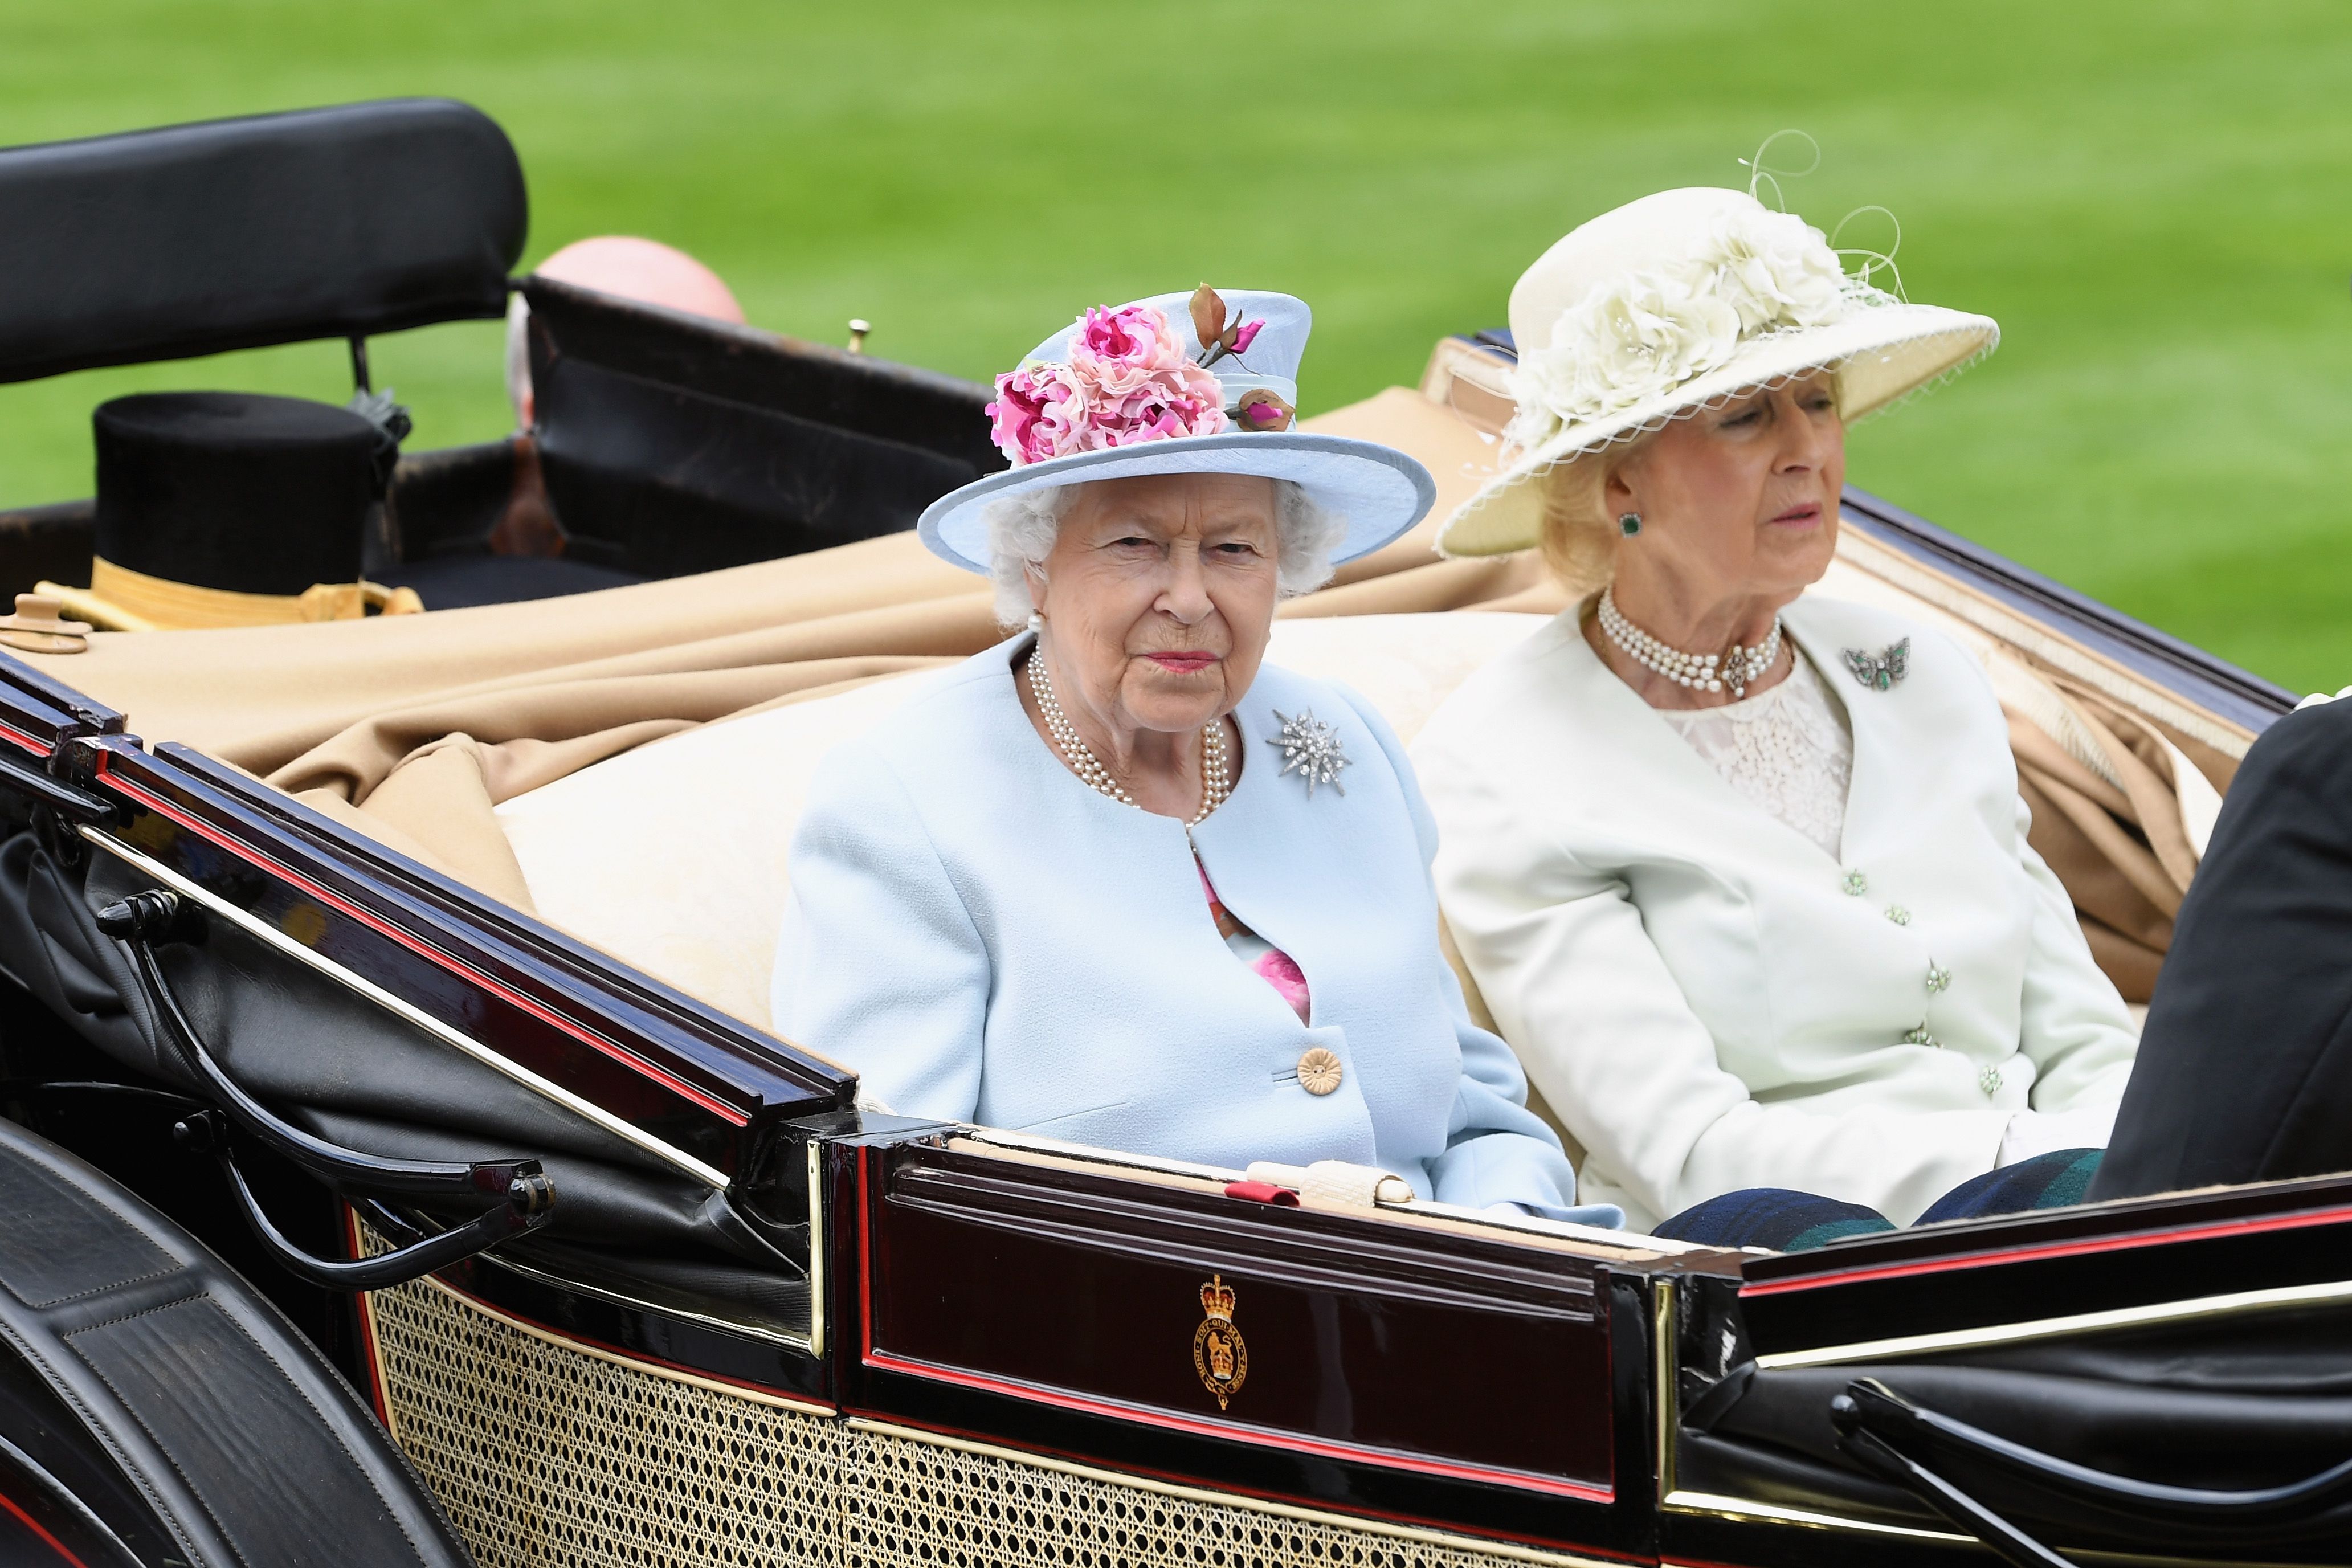 Queen Elizabeth II and Princess Alexandra, The Honourable Lady Ogilvy at the royal procession on day 2 of Royal Ascot at Ascot Racecourse on June 20, 2018 | Photo: Getty Images